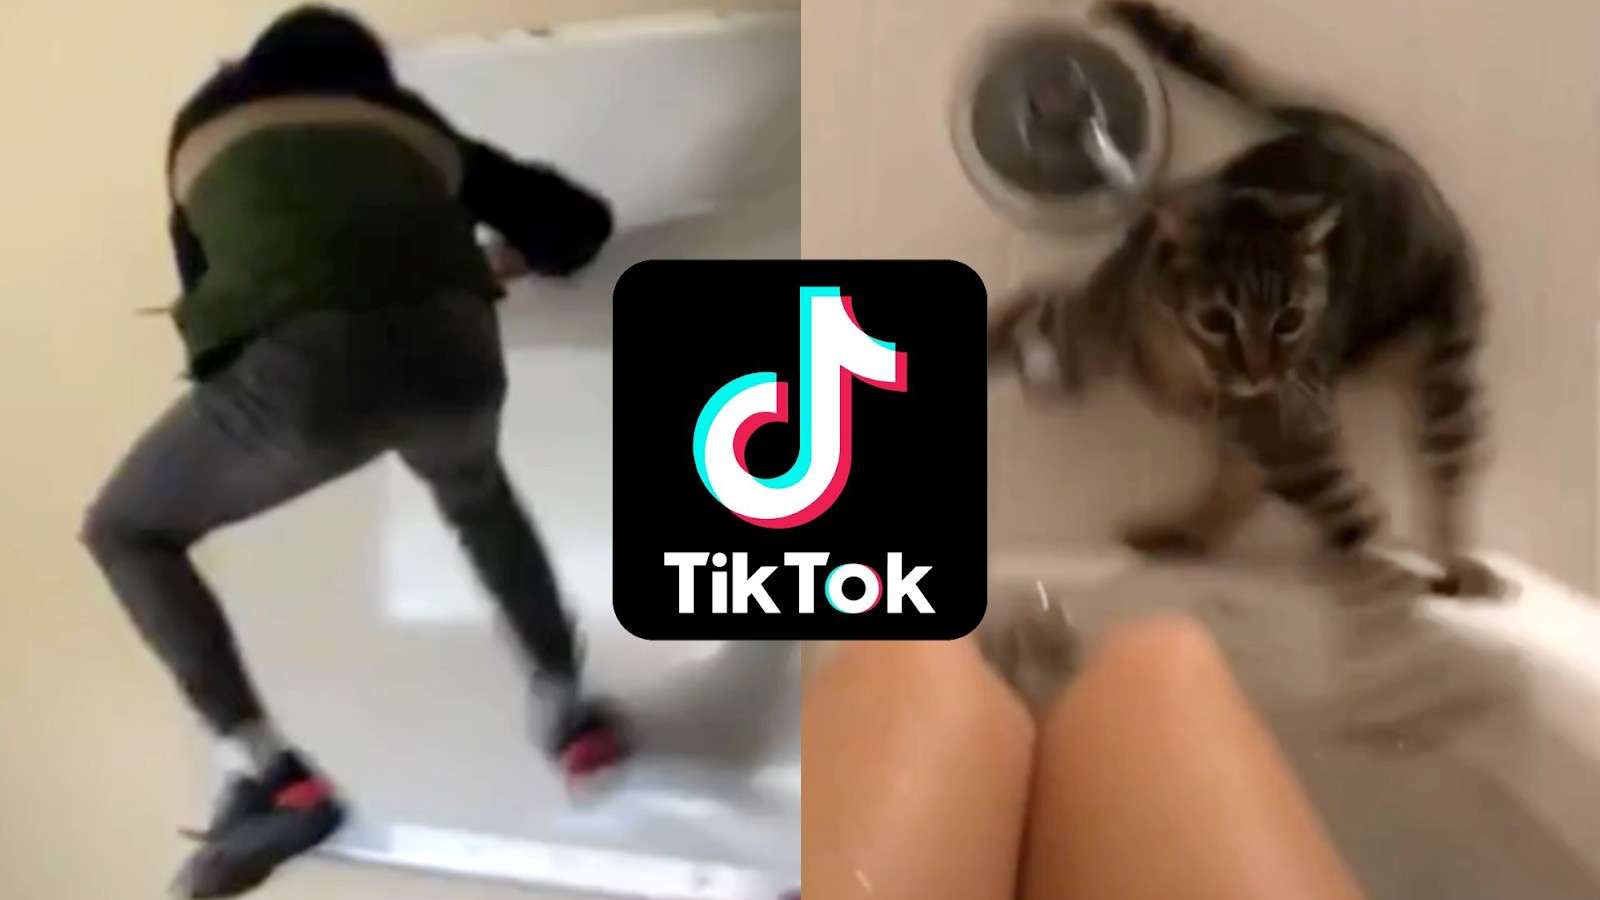 Picture of a man by a whiteboard and a cat nearly falling into a bath, with the TikTok logo in the middle